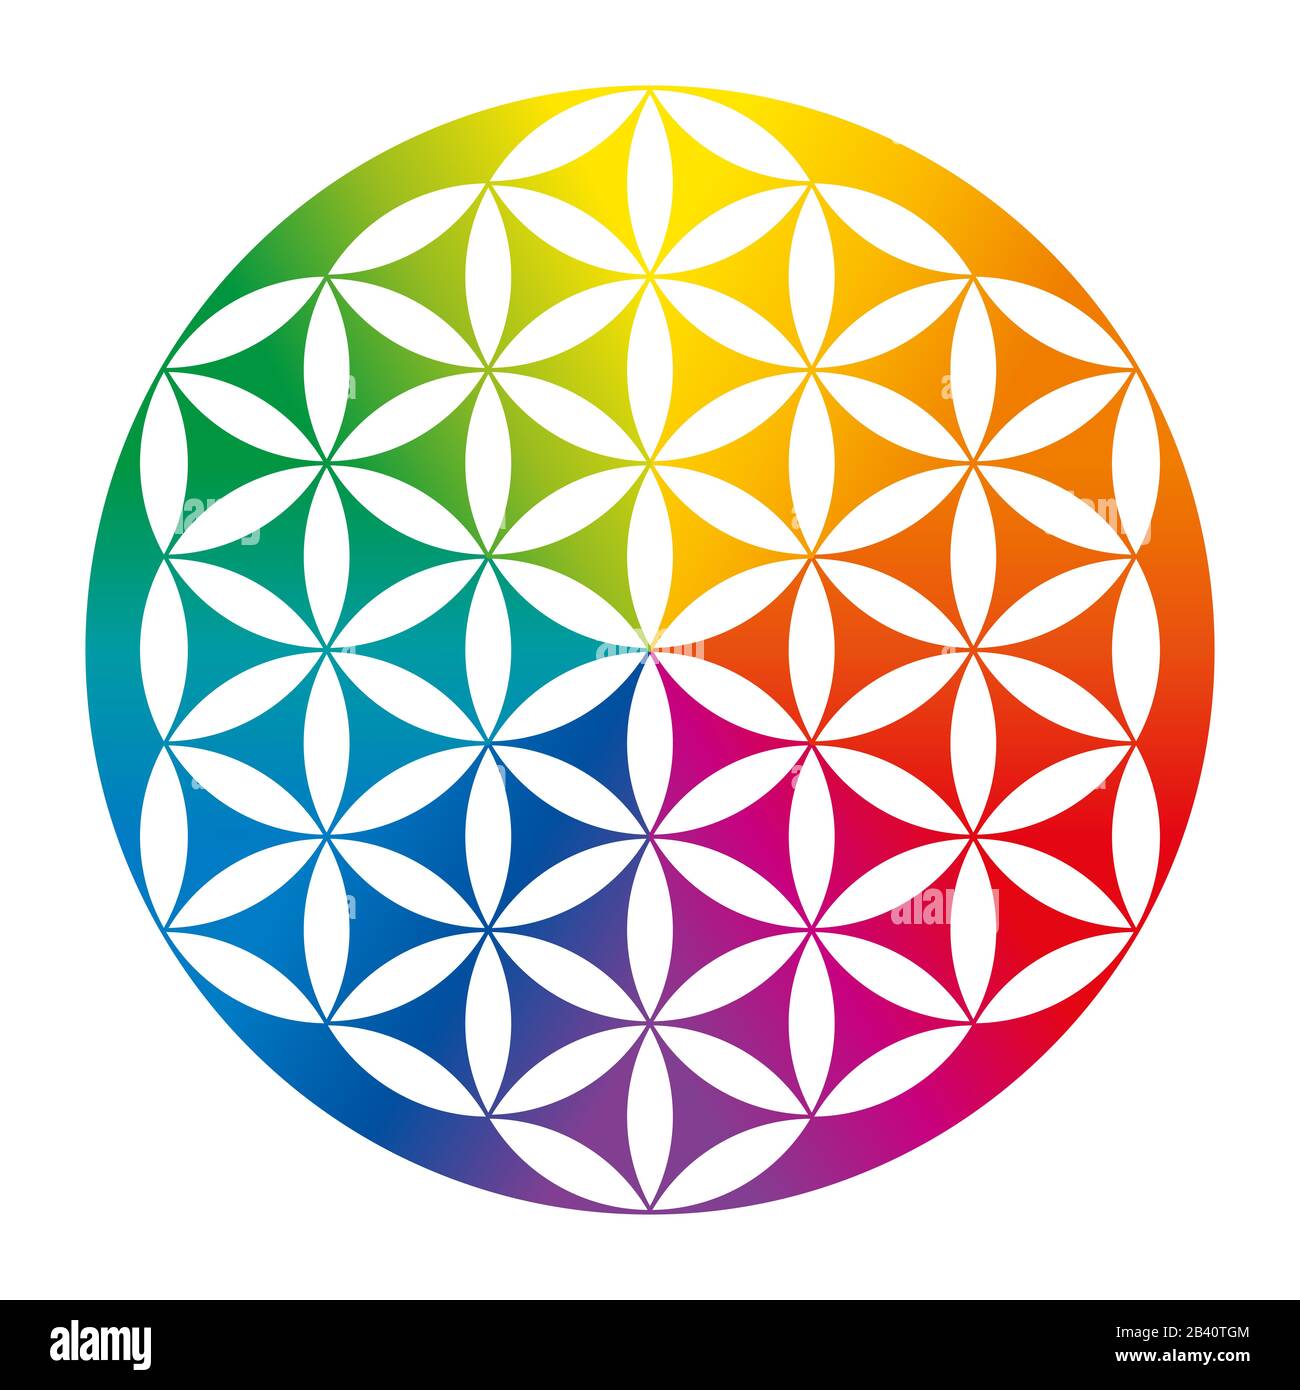 Rainbow colored inverted Flower of Life. Geometrical figure, spiritual symbol and Sacred Geometry. Overlapping circles forming a flower like pattern. Stock Photo